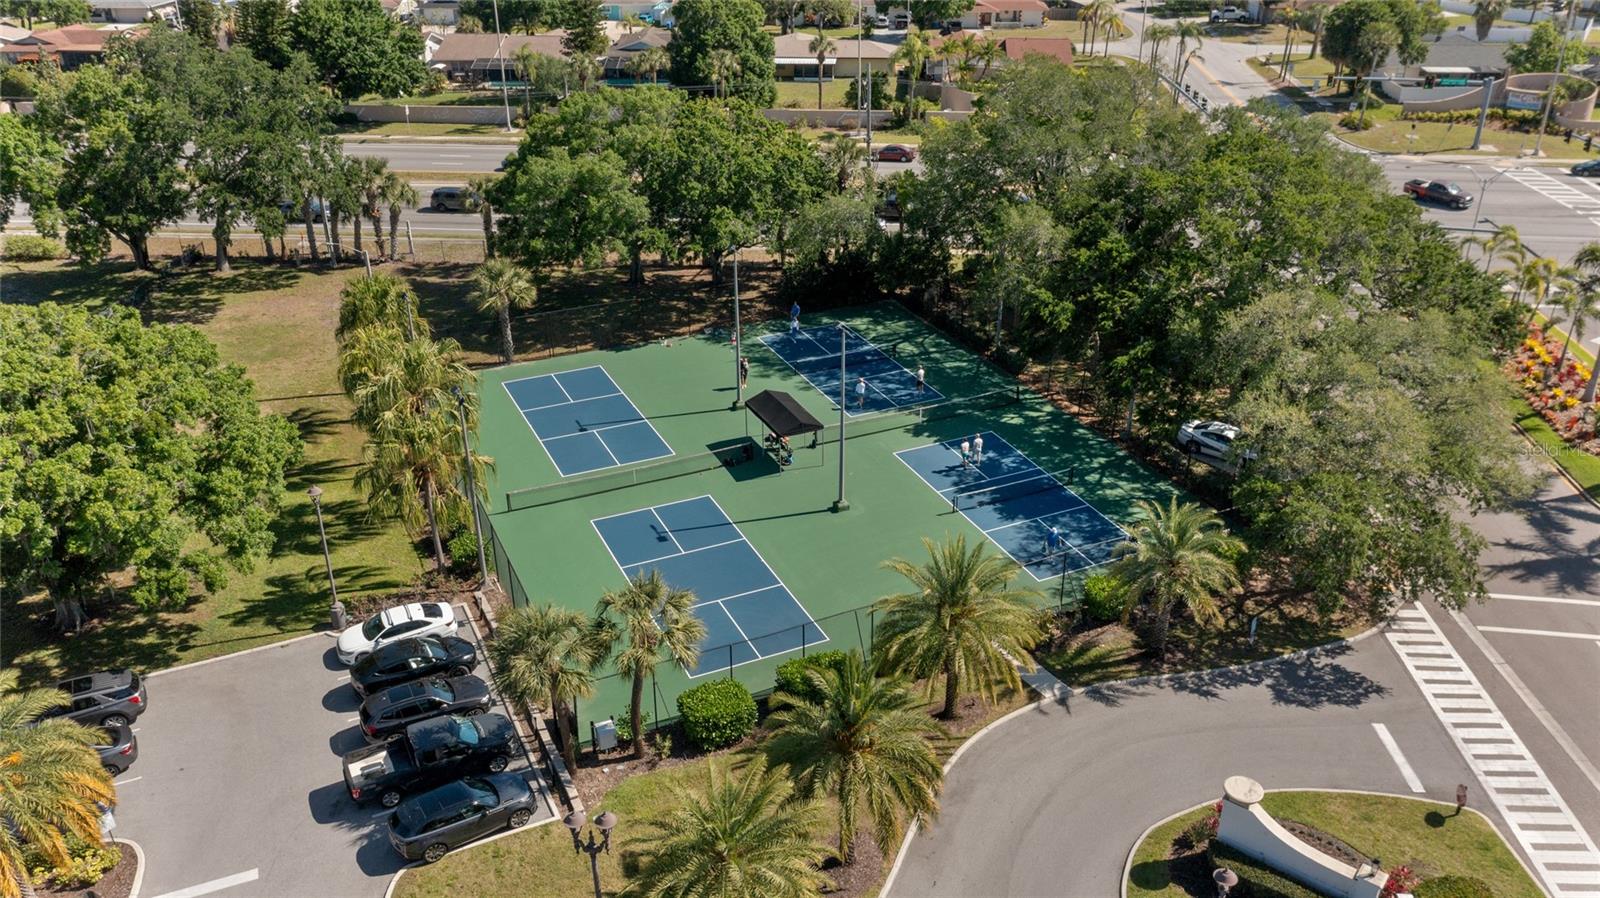 pickle ball courts